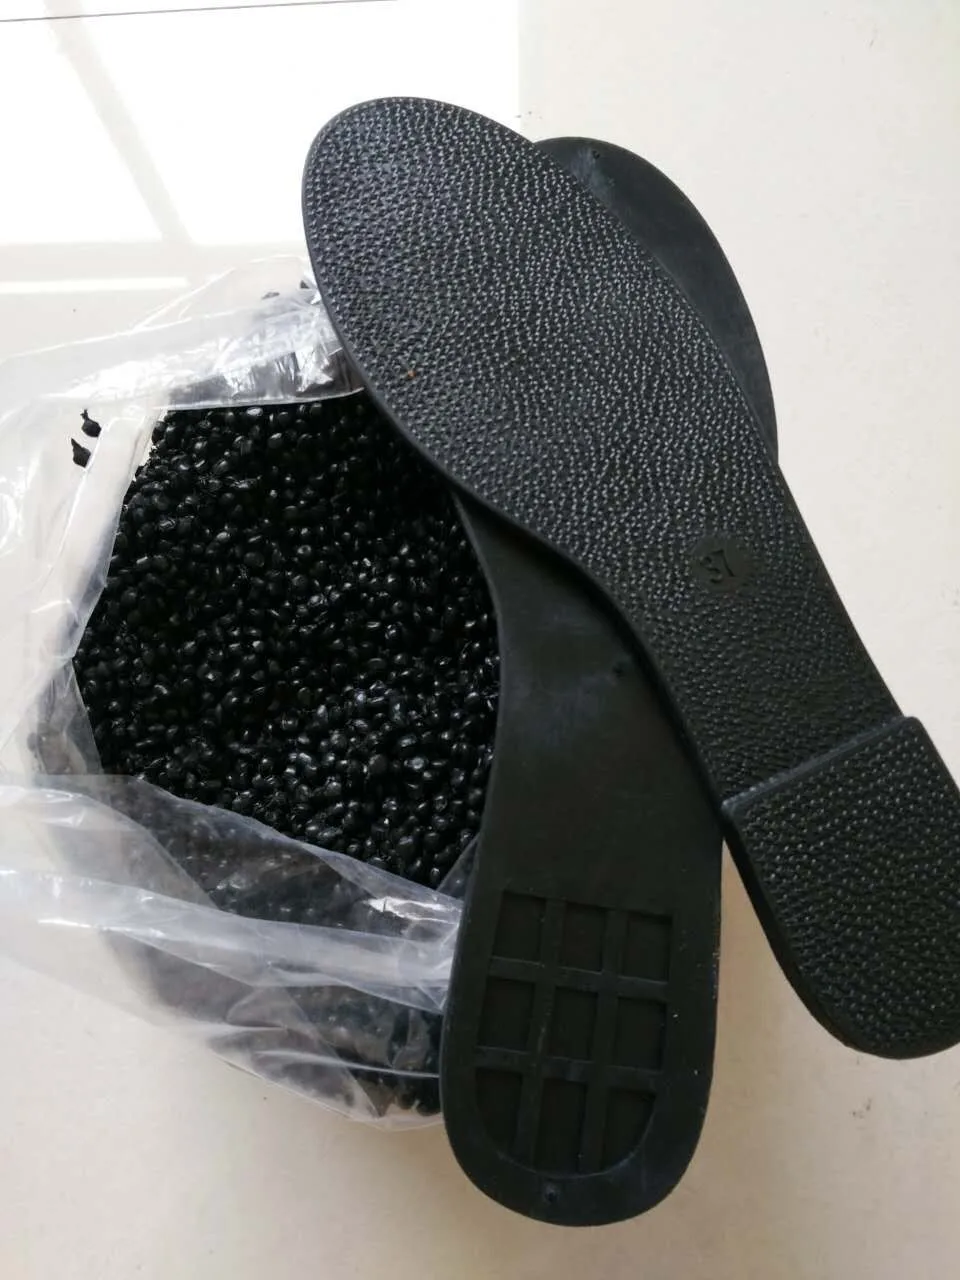 thermoplastic rubber outsole